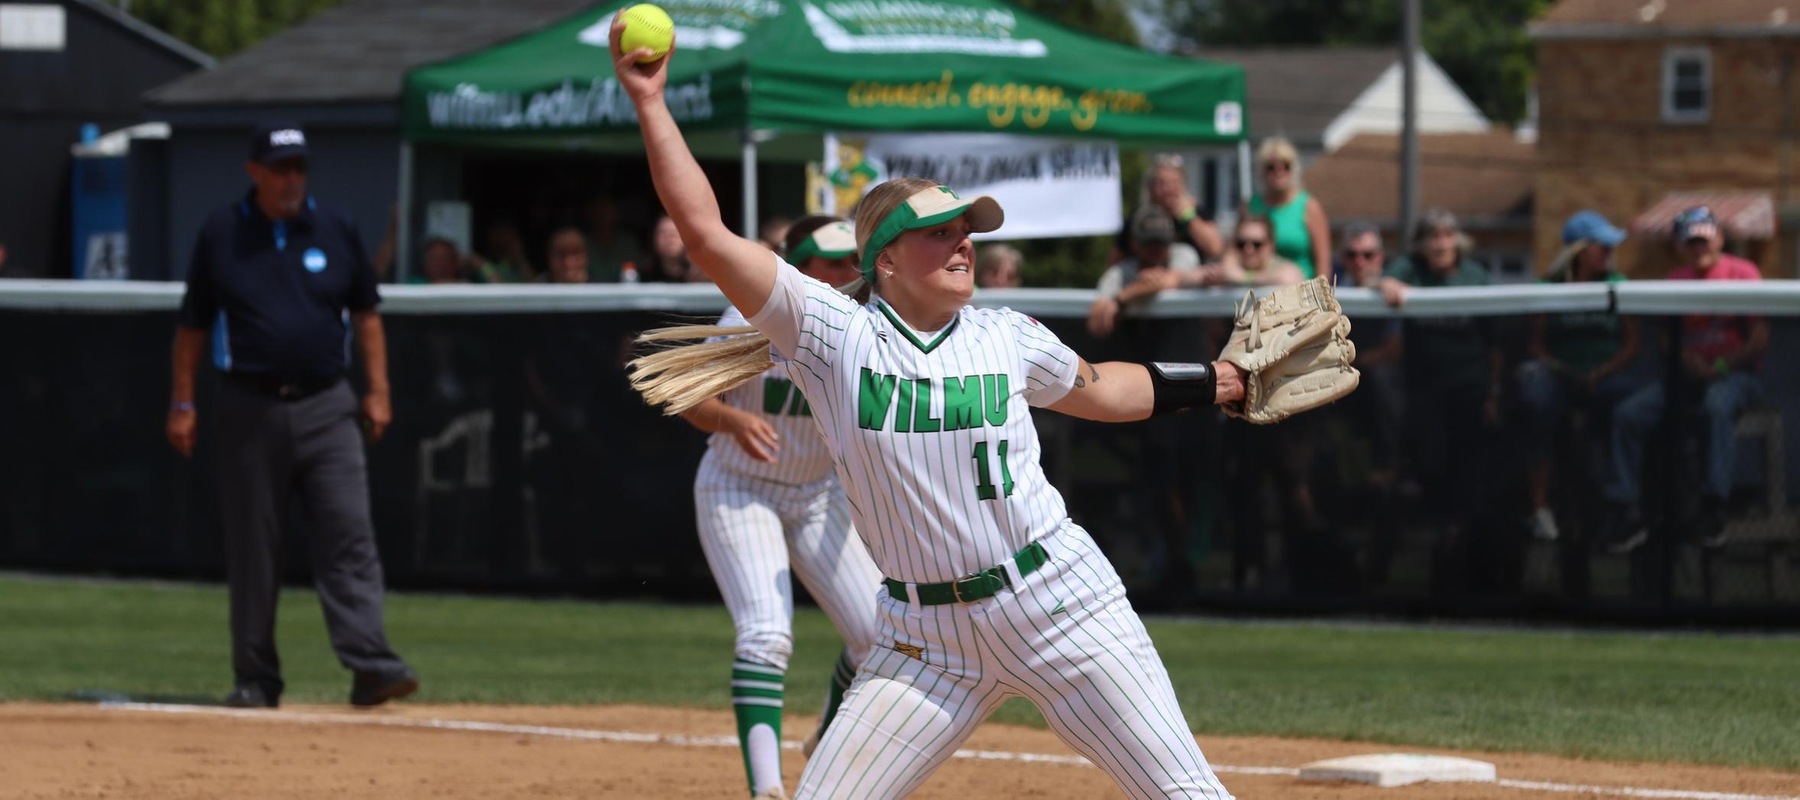 File photo of Kylee Gunkel who threw a complete game shutout against Georgian Court in the Regionals. Copyright 2023; Wilmington University. All rights reserved. Photo by Taj Young. May 11, 2023 vs. Pace in NCAA Regionals.